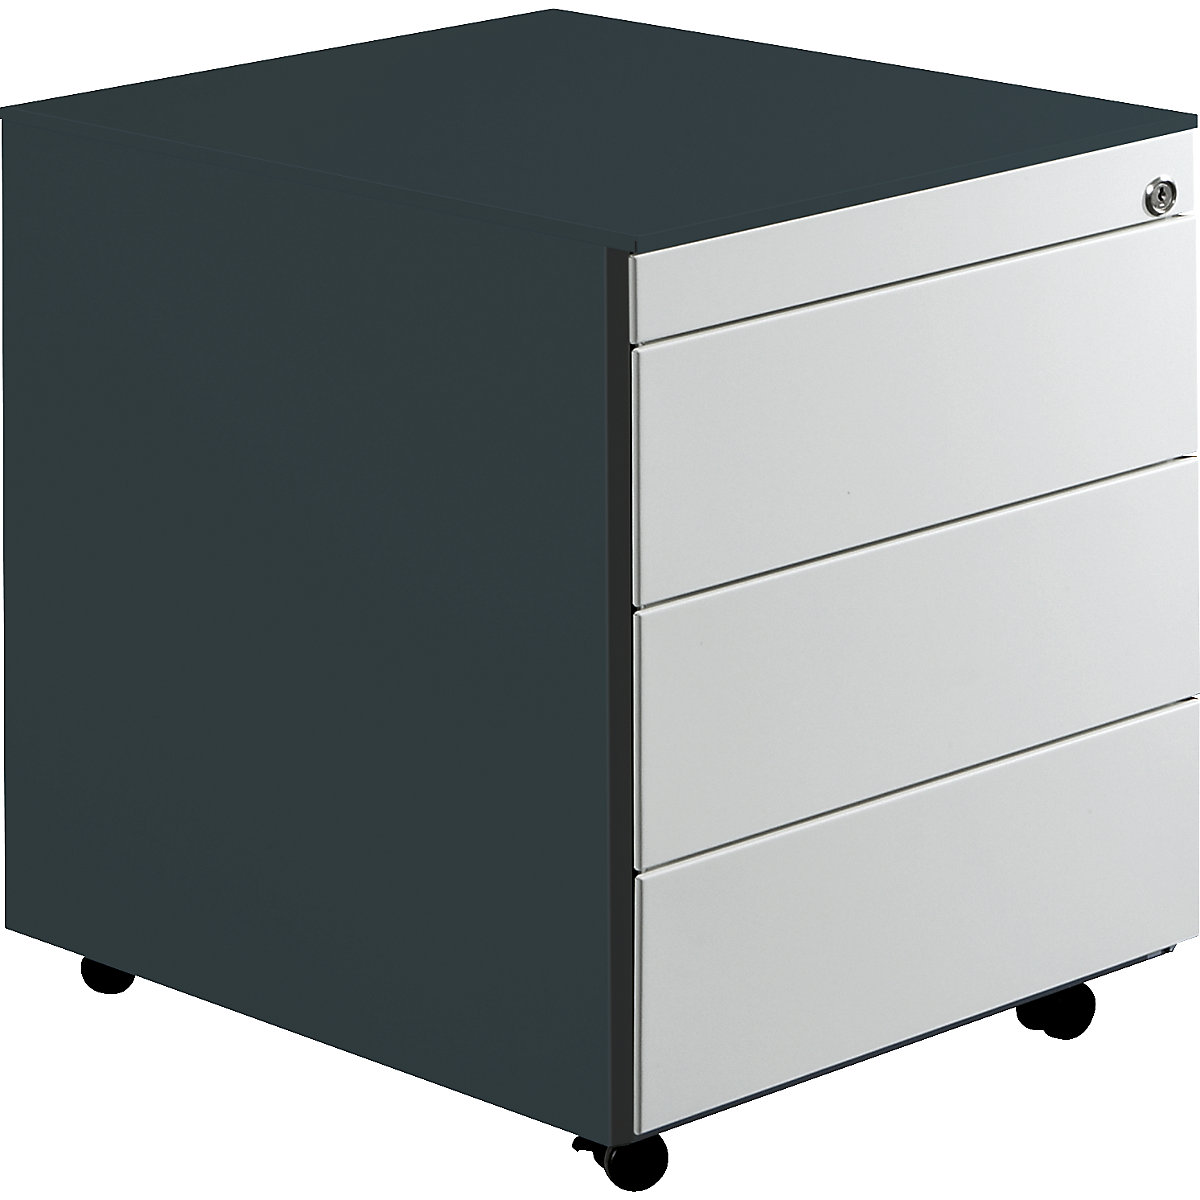 Drawer pedestal with castors – mauser, HxD 570 x 600 mm, steel top, 3 drawers, charcoal / light grey-8